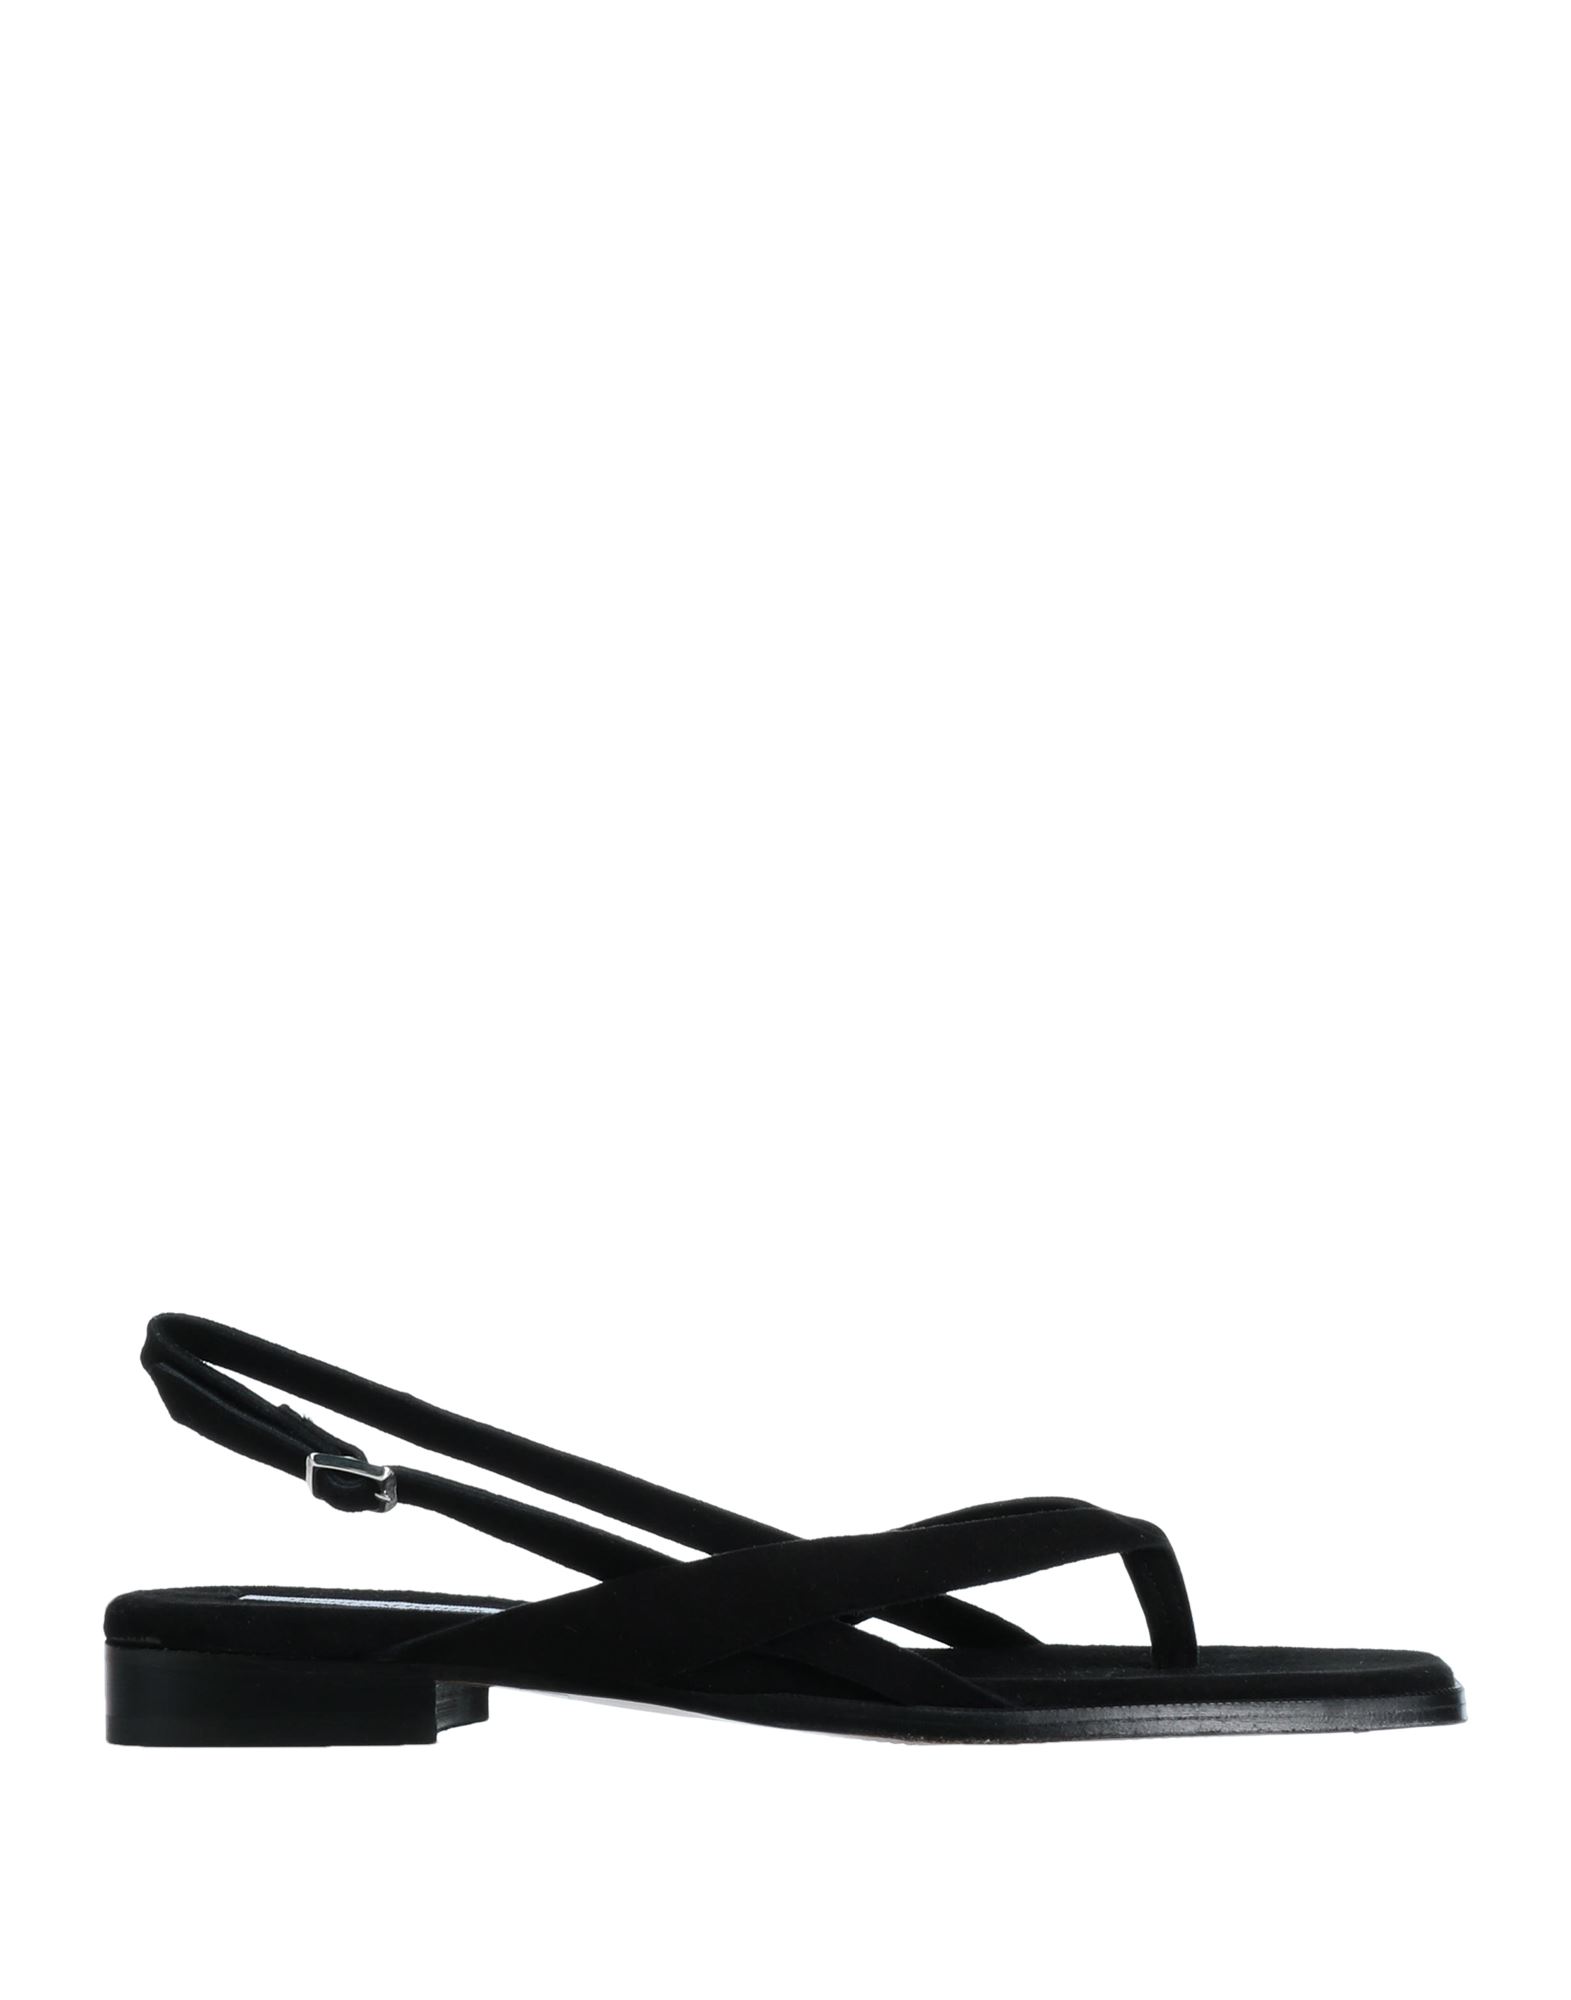 About Arianne Toe Strap Sandals In Black